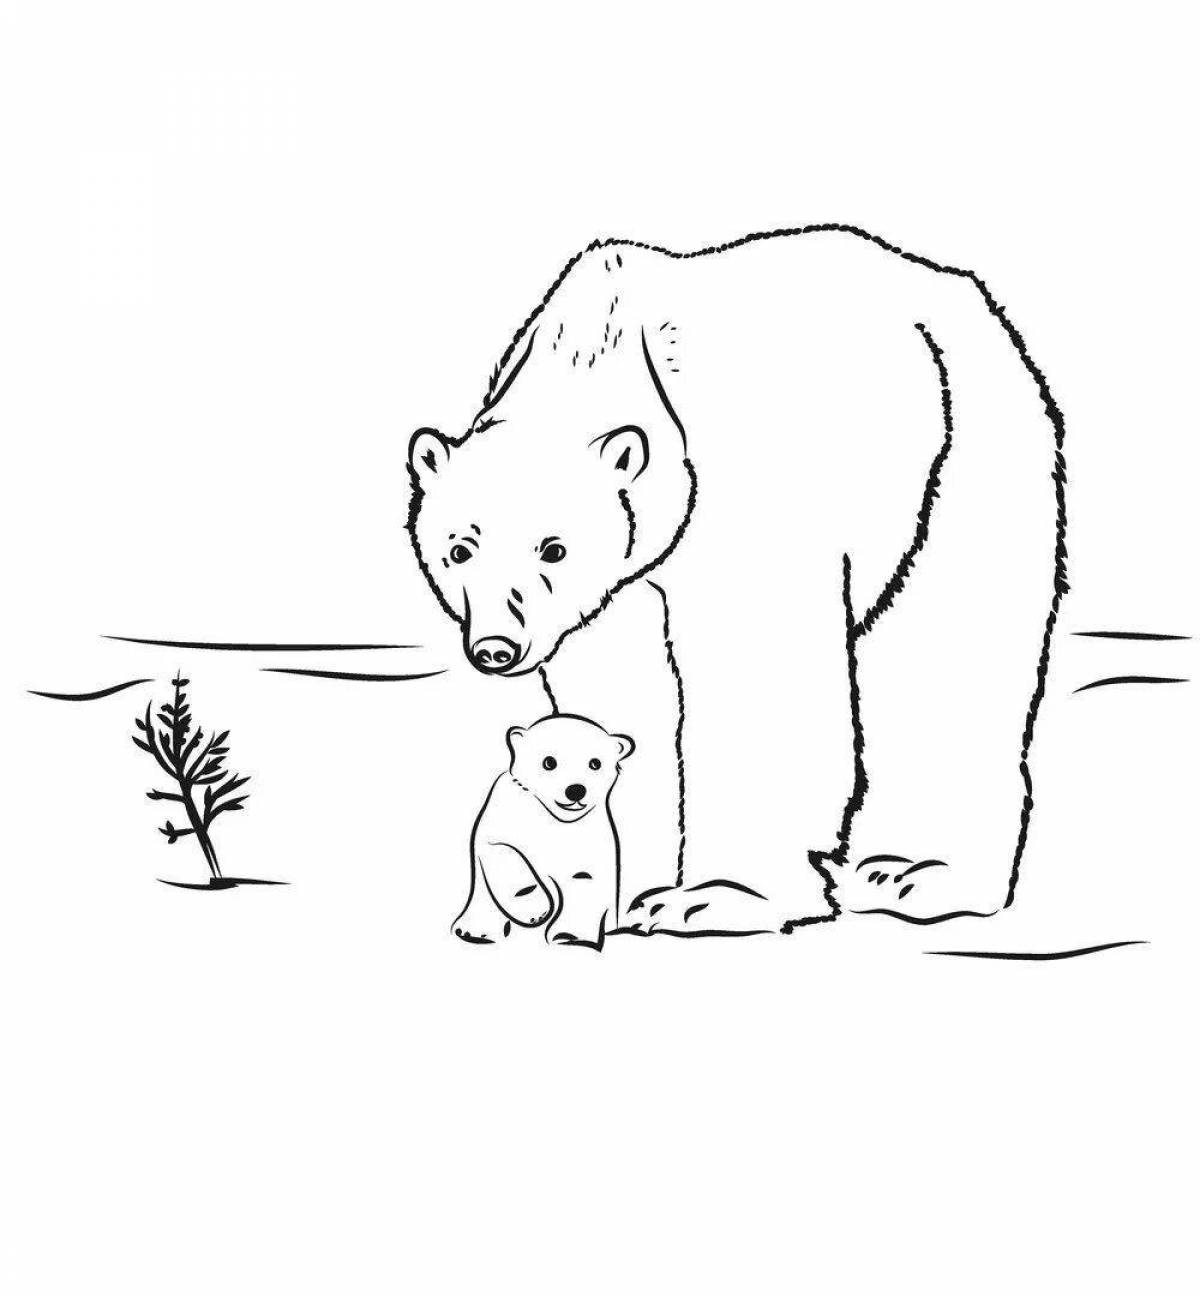 Coloring page affectionate polar bear with cub